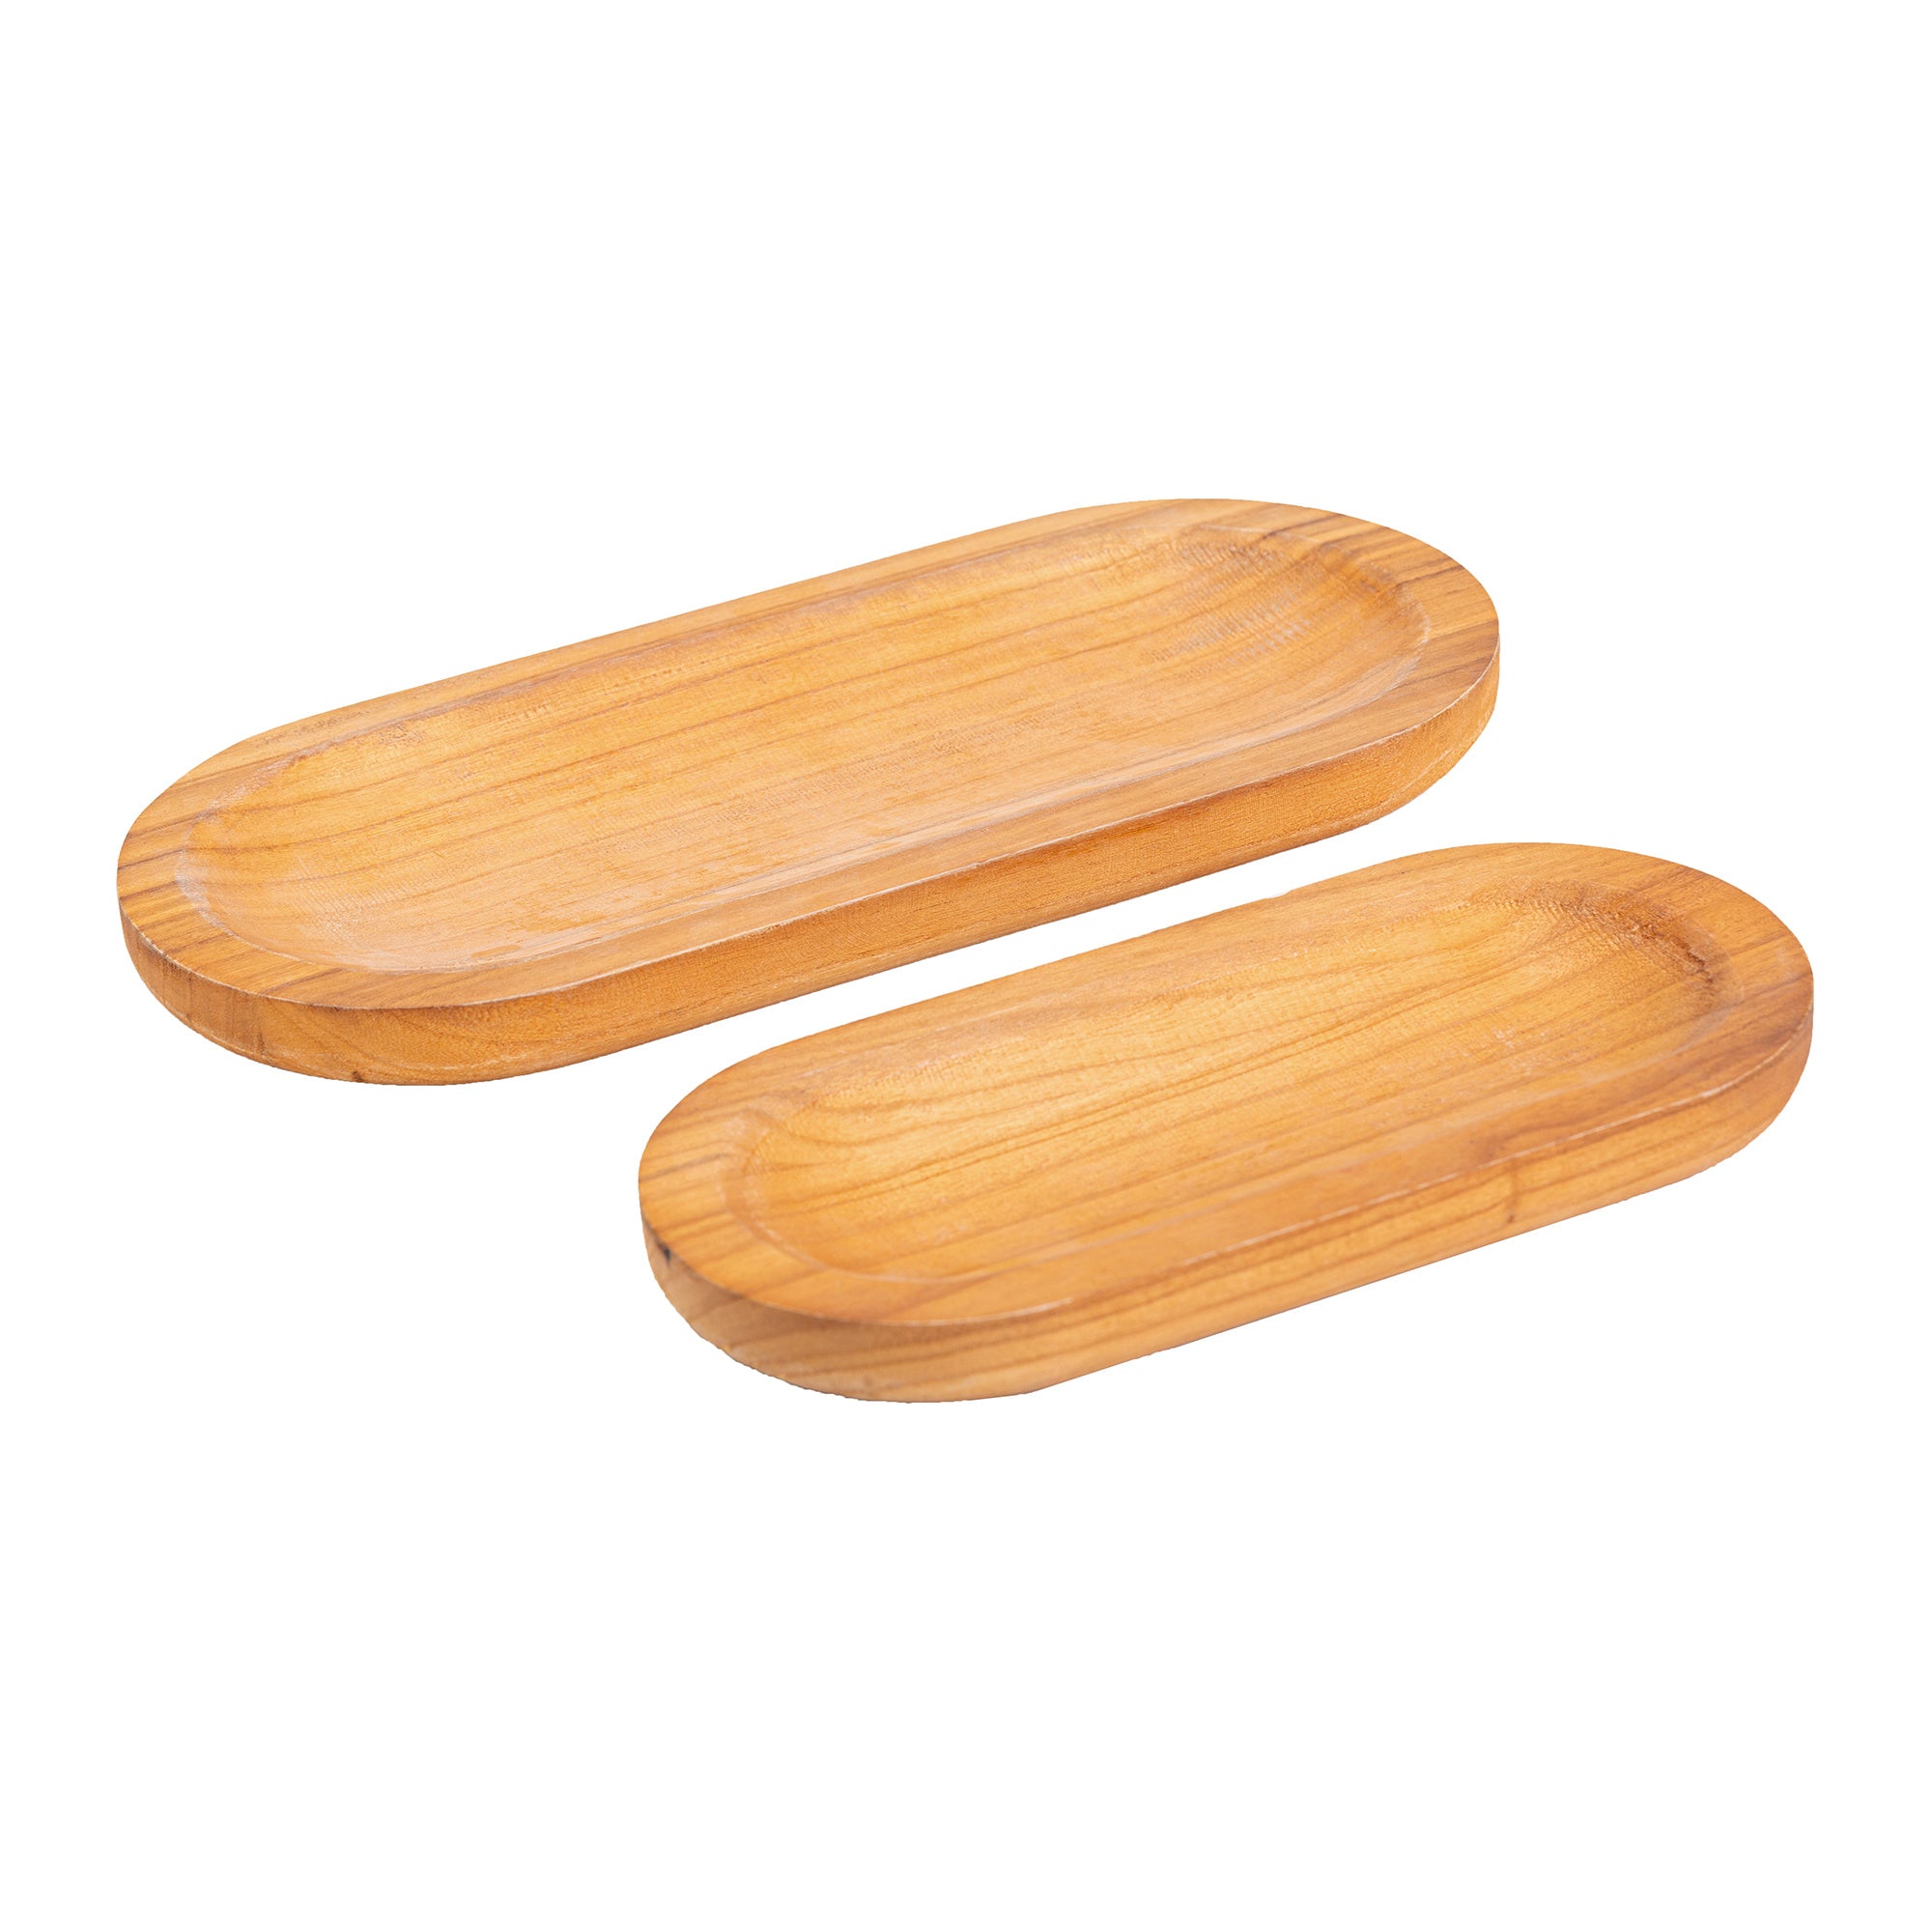 Oval Wooden Serving Trays Set of 2 - life of kuhl @HOME